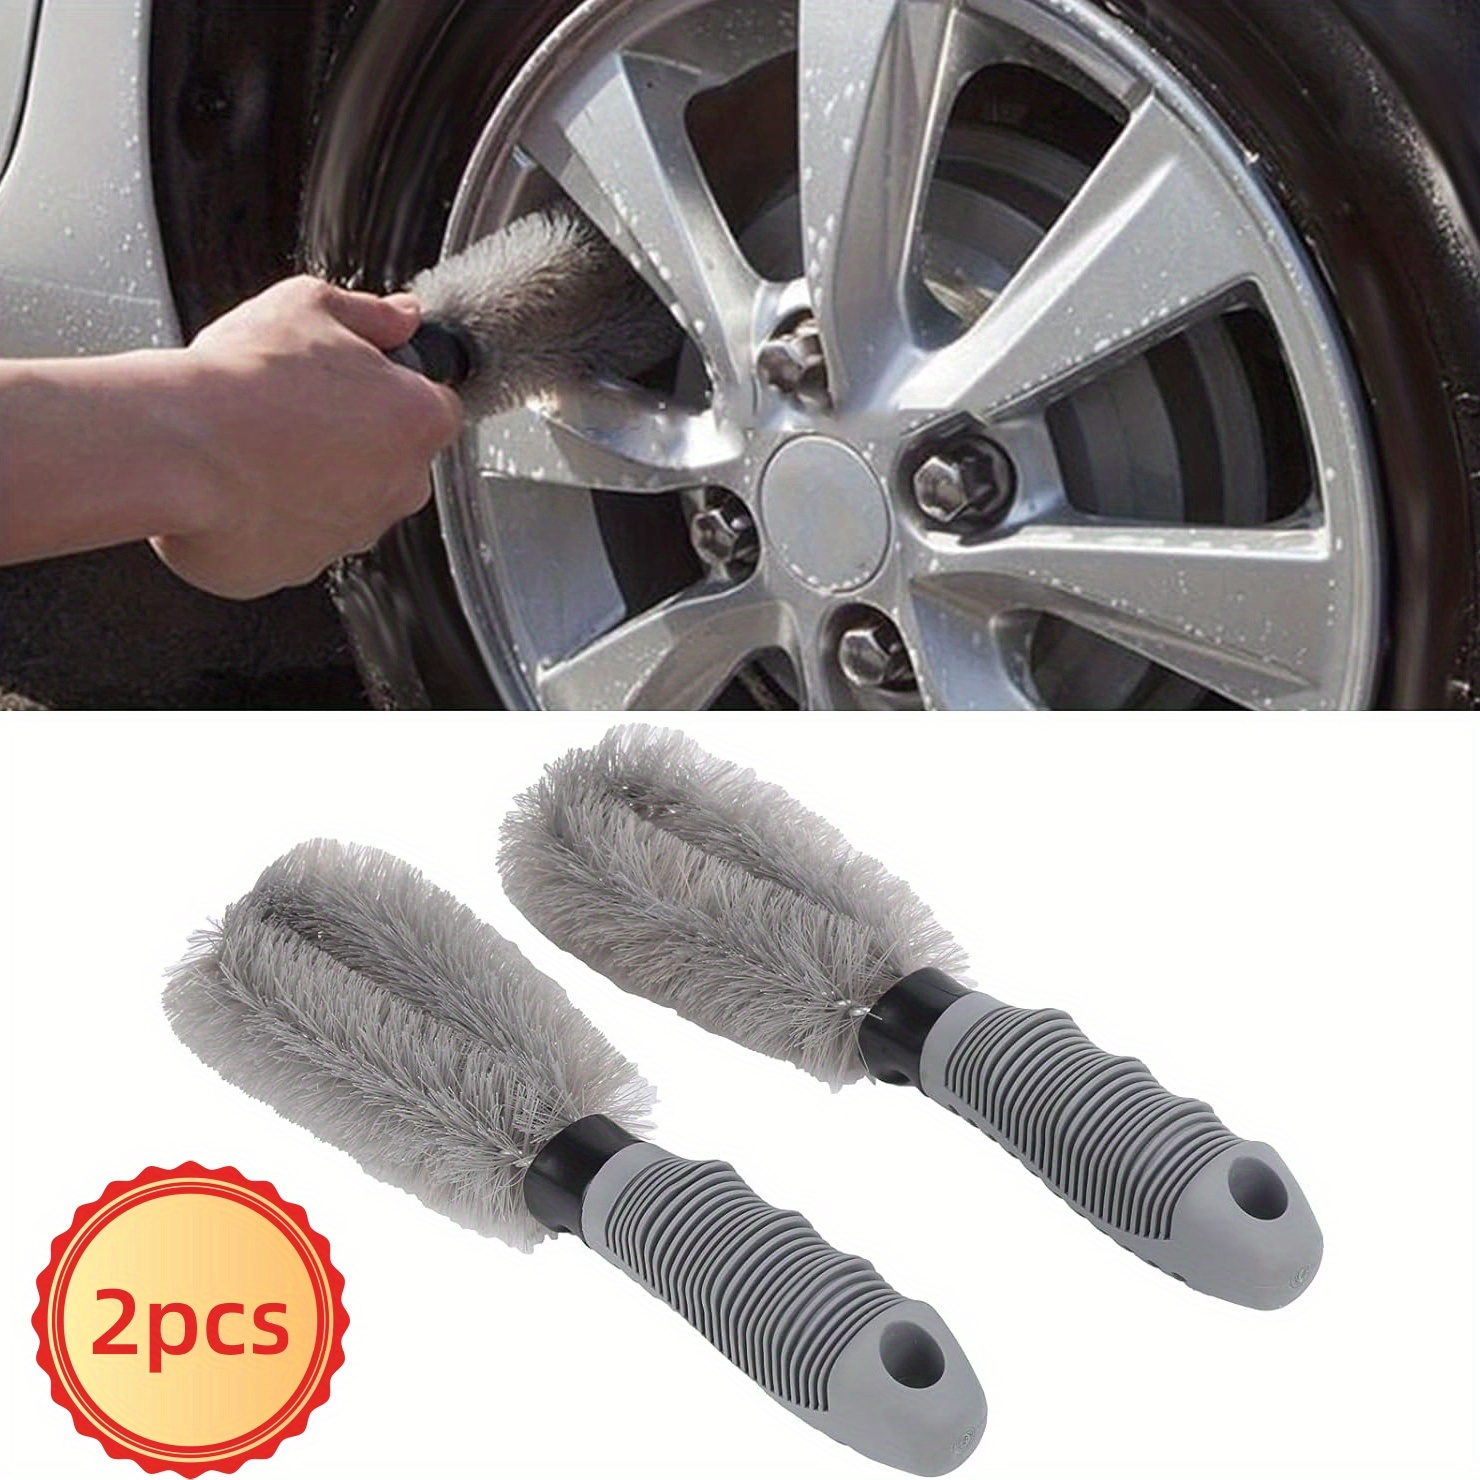 Car Wheel Cleaning Brush Tool Tire Auto Washing Clean Alloy Soft